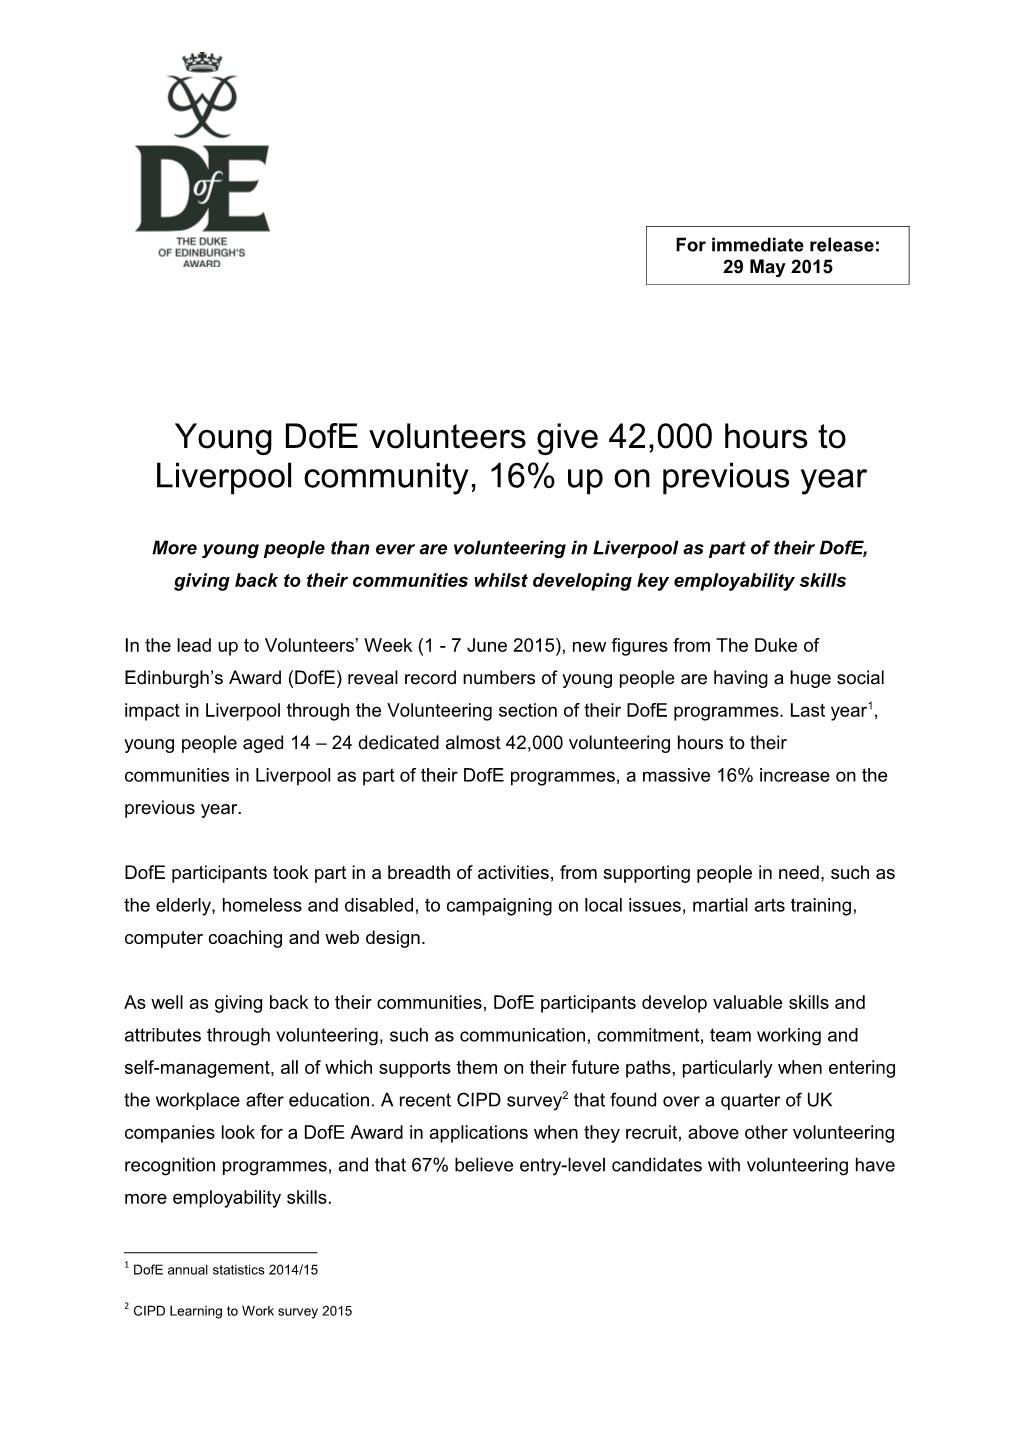 Young Dofe Volunteers Give 42,000 Hours to Liverpool Community,16% Upon Previous Year